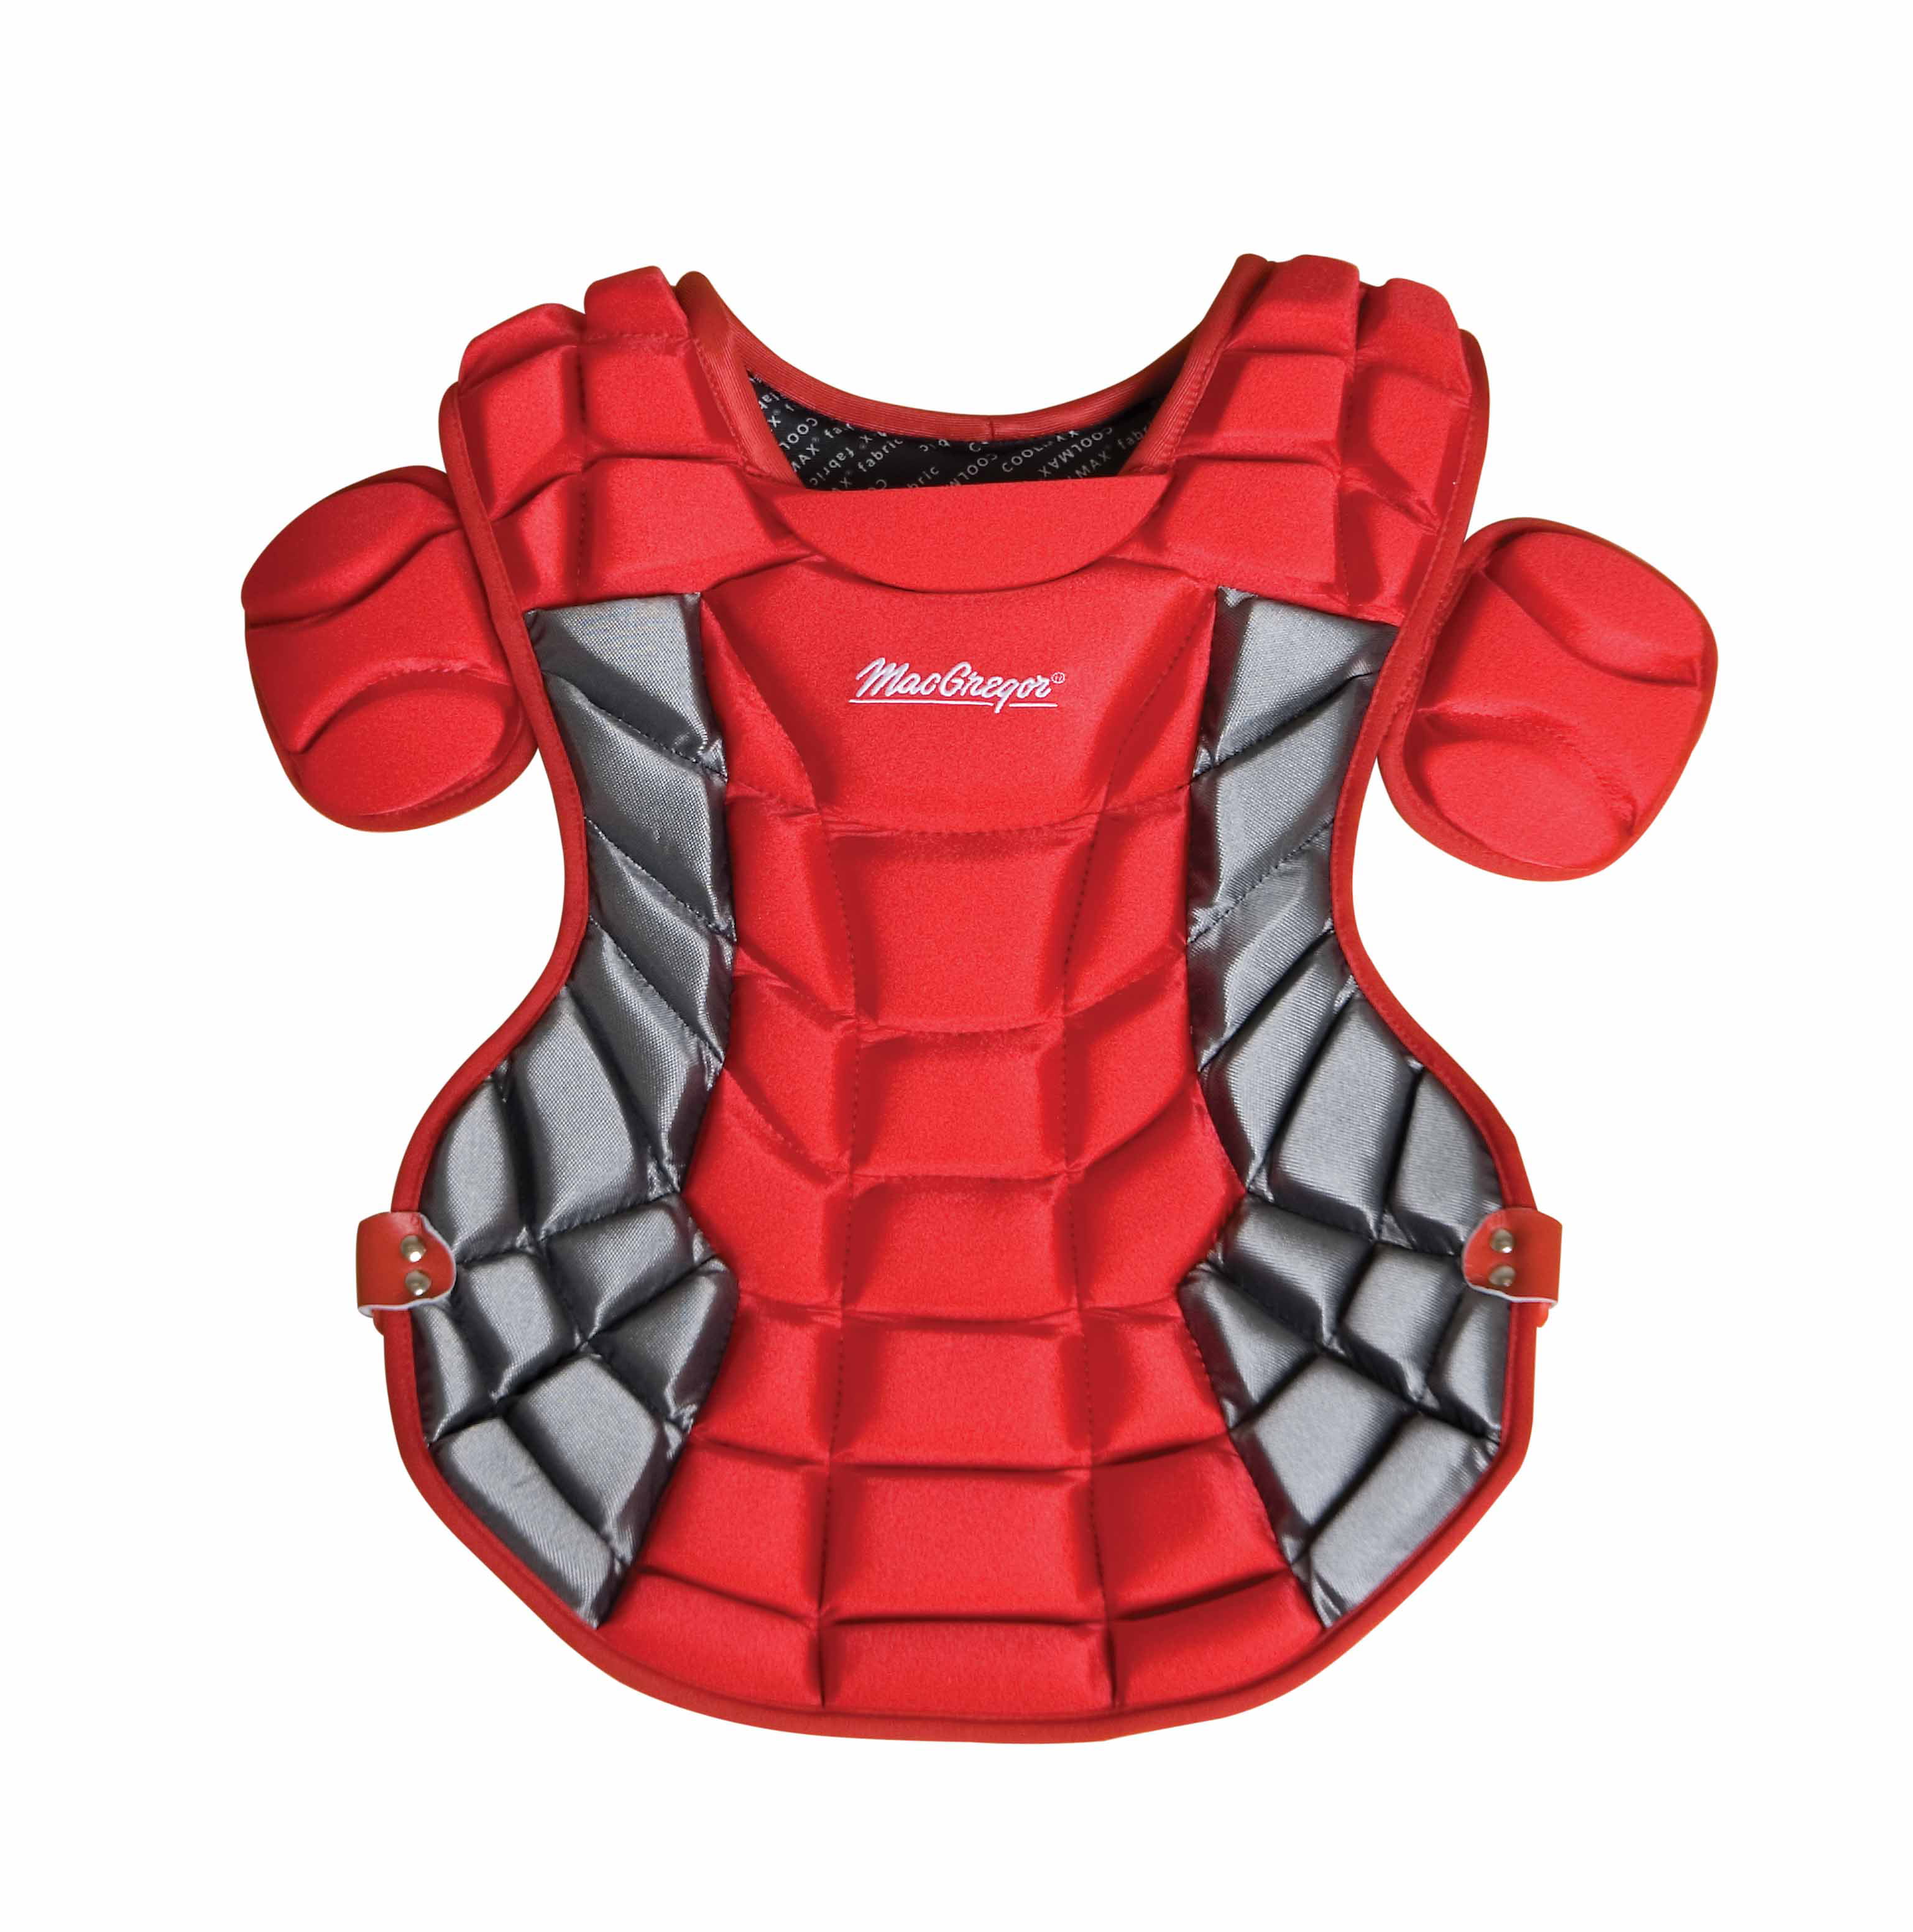 Junior Catcher's Gear Pack in Black/Silver (Ages 5-8) 